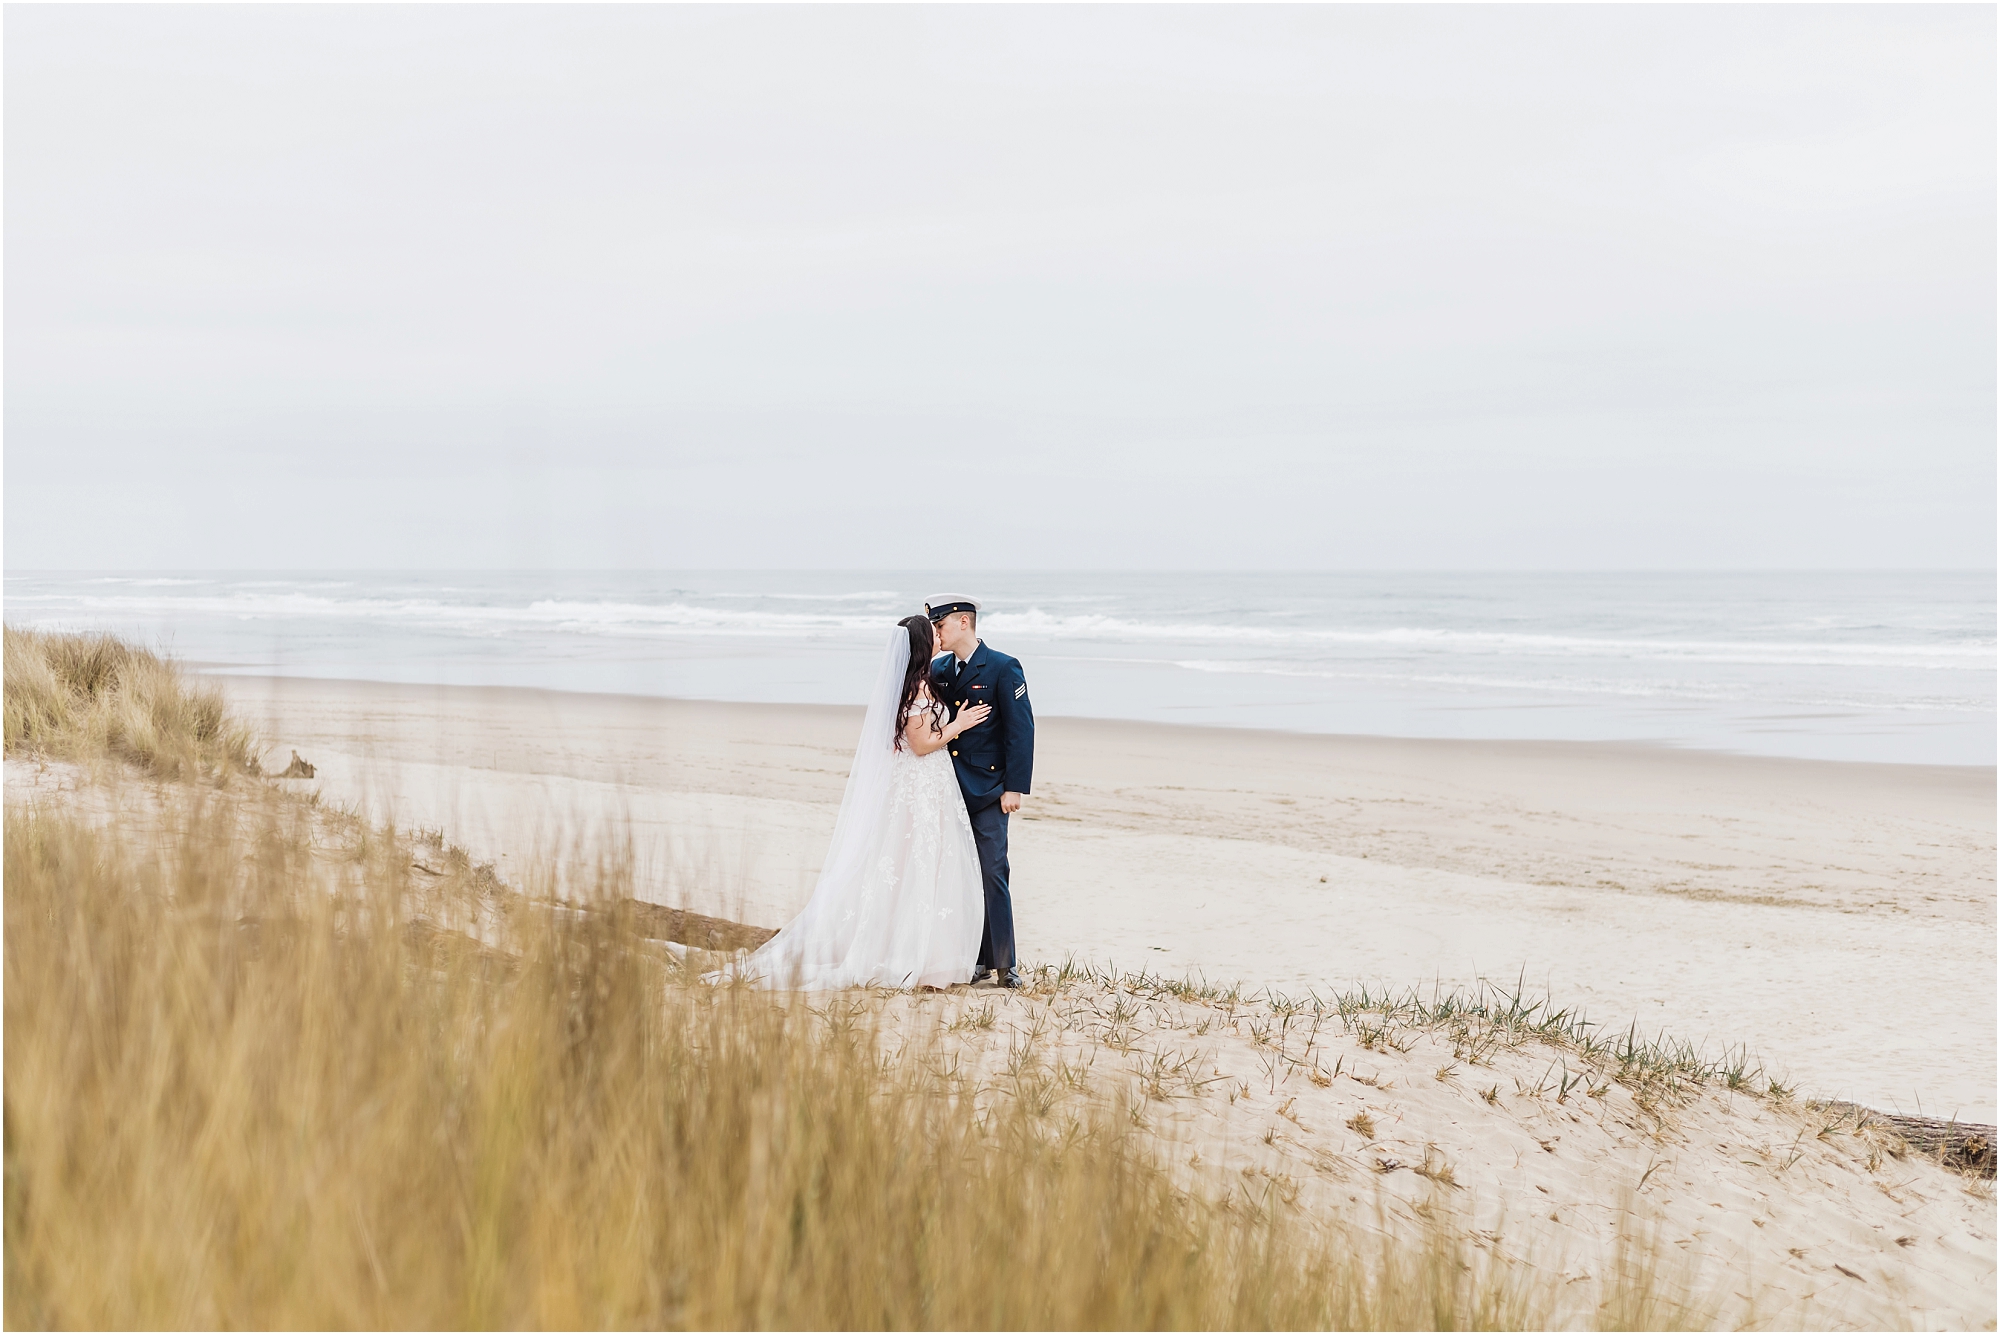 A groom, wearing his navy US Coast Guard uniform, and a bride wearing a blush pink off the shoulder gown, with a long white veil, pose together on the sandy beach along the ocean for this Oregon Coast Guard Elopement in Winchester Bay. | Erica Swantek Photography